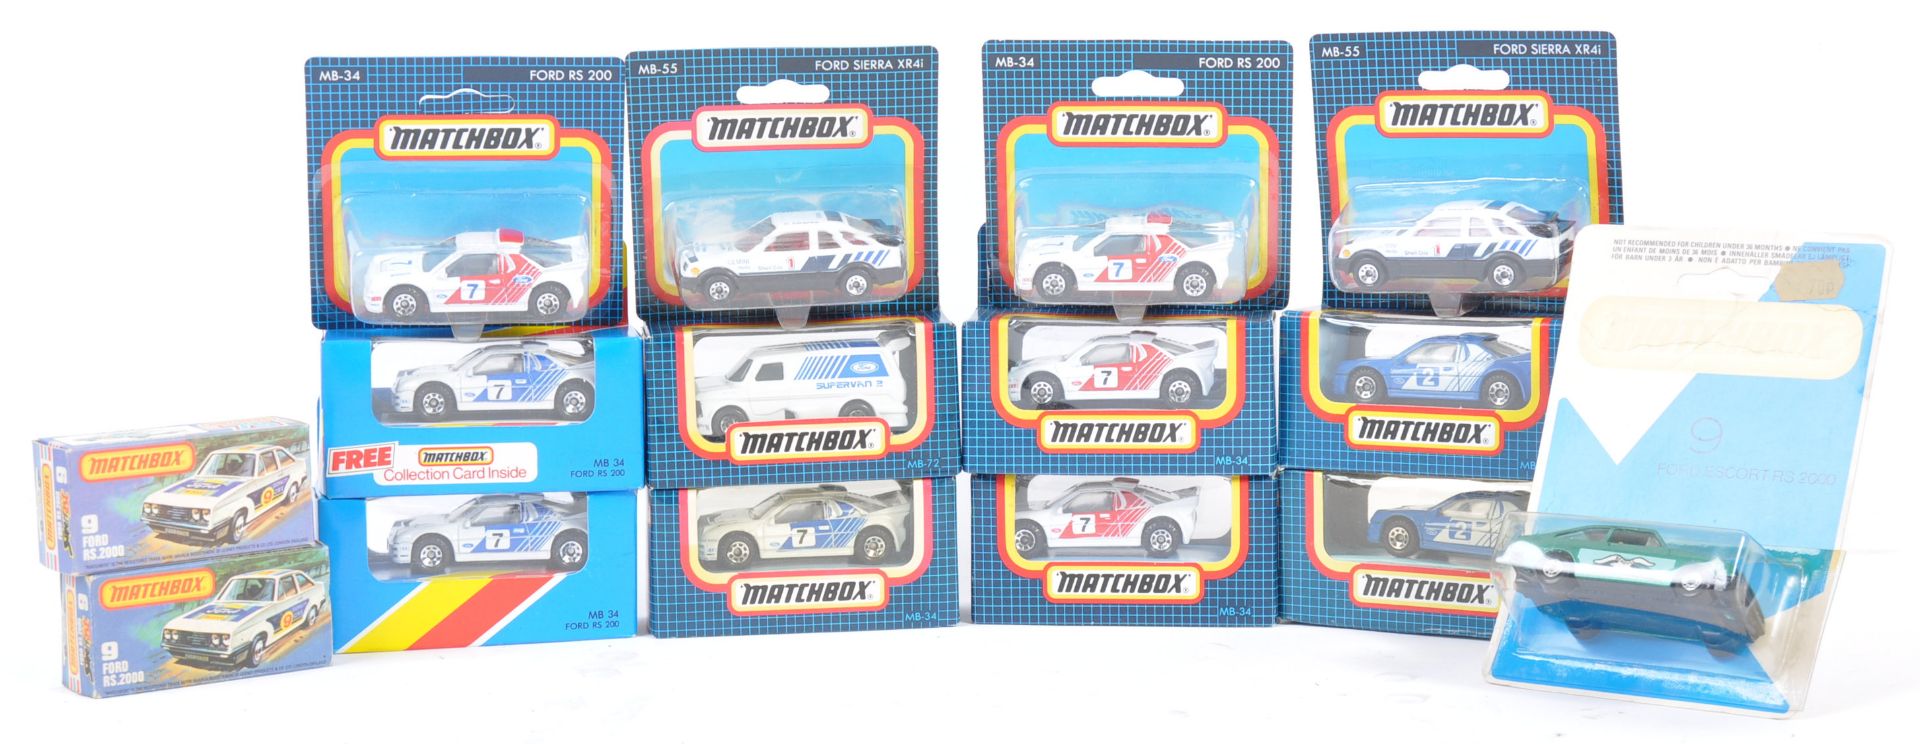 COLLECTION OF VINTAGE MATCHBOX CARDED / BOXED DIECAST MODELS